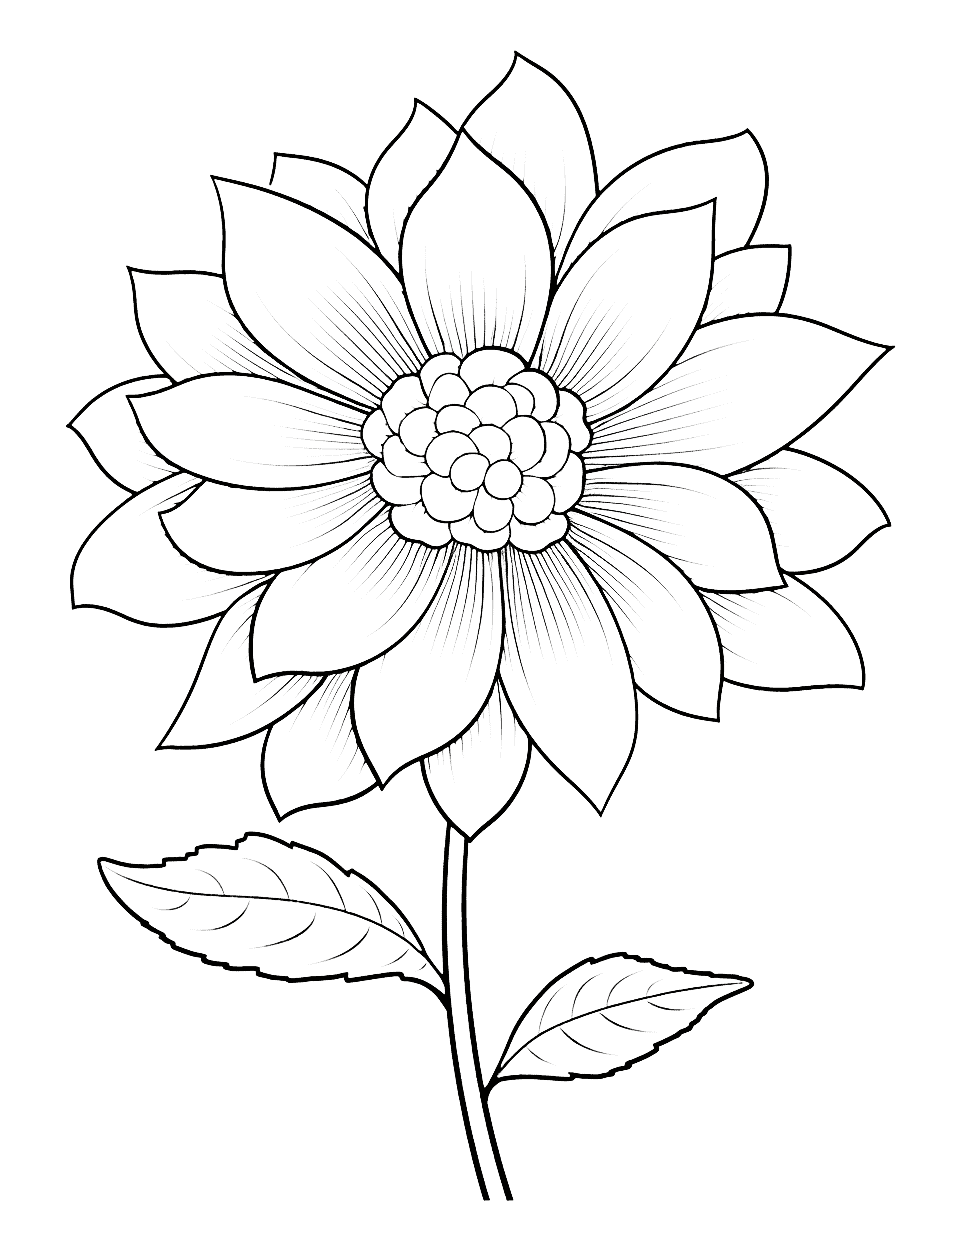 Pretty Petals Flower Coloring Page - A flower drawing showcasing a beautiful flower with pretty, detailed petals.